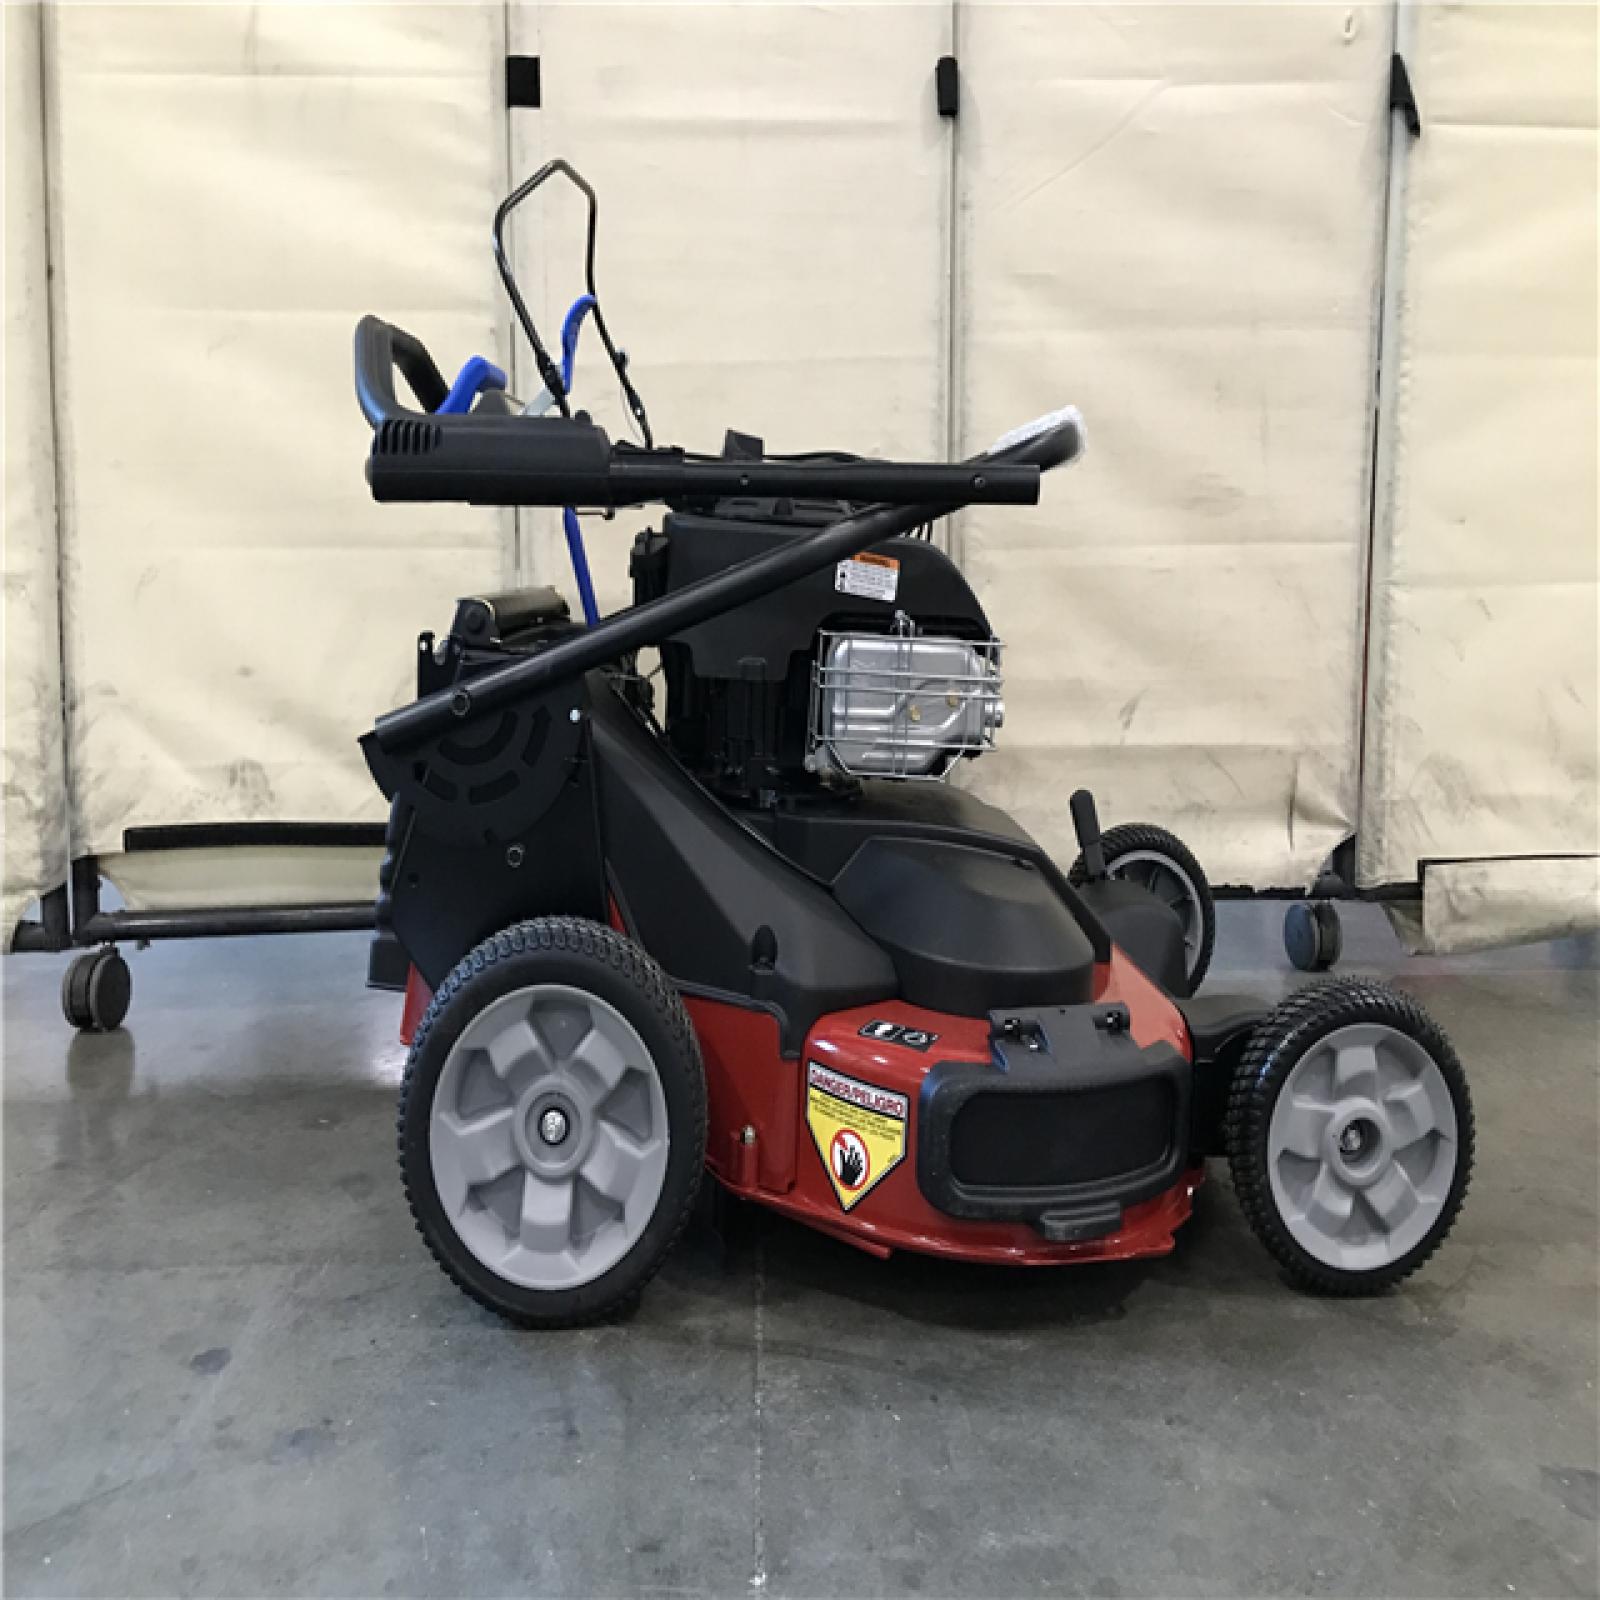 California AS-IS Toro TimeMaster 30in. Briggs & Stratton Personal Pace Self-Propelled Walk-Behind Gas Lawn Mower W/ Spin-Stop-Appears LIKE-NEW Condition